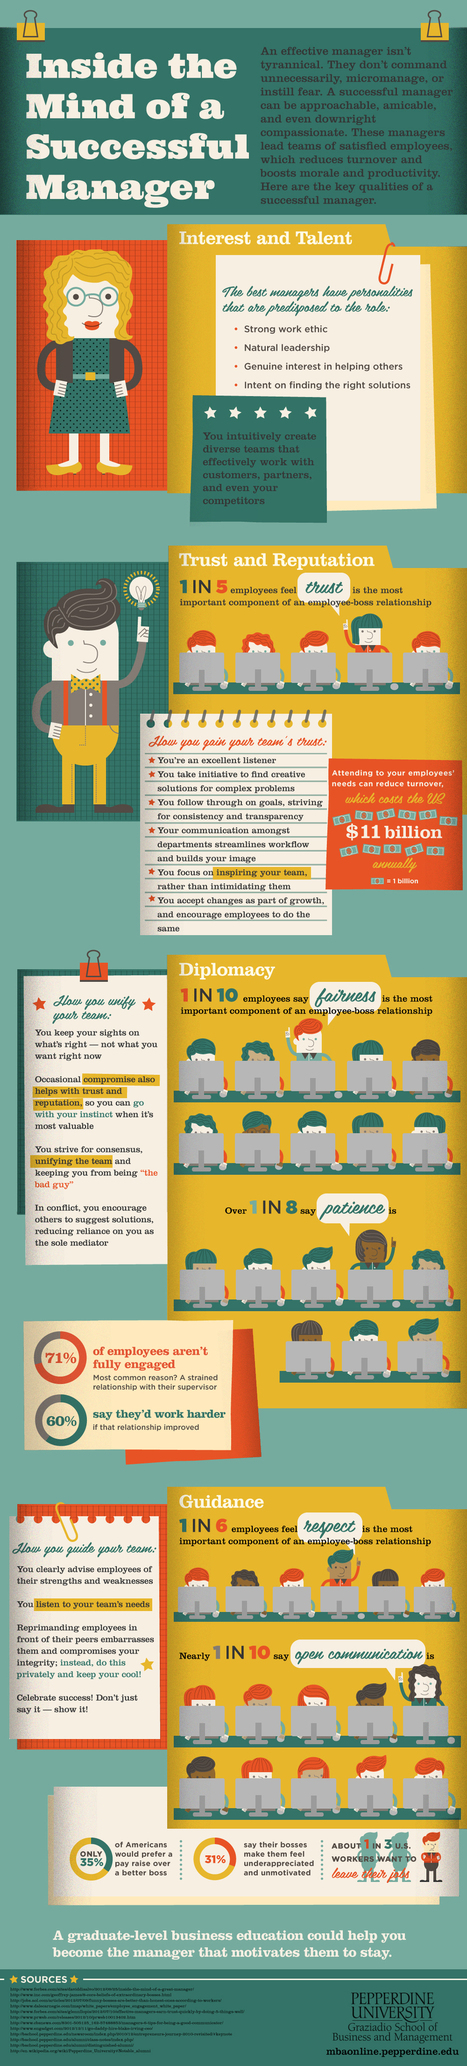 (Infographic) What Makes a Successful Manager? | El rincón de mferna | Scoop.it